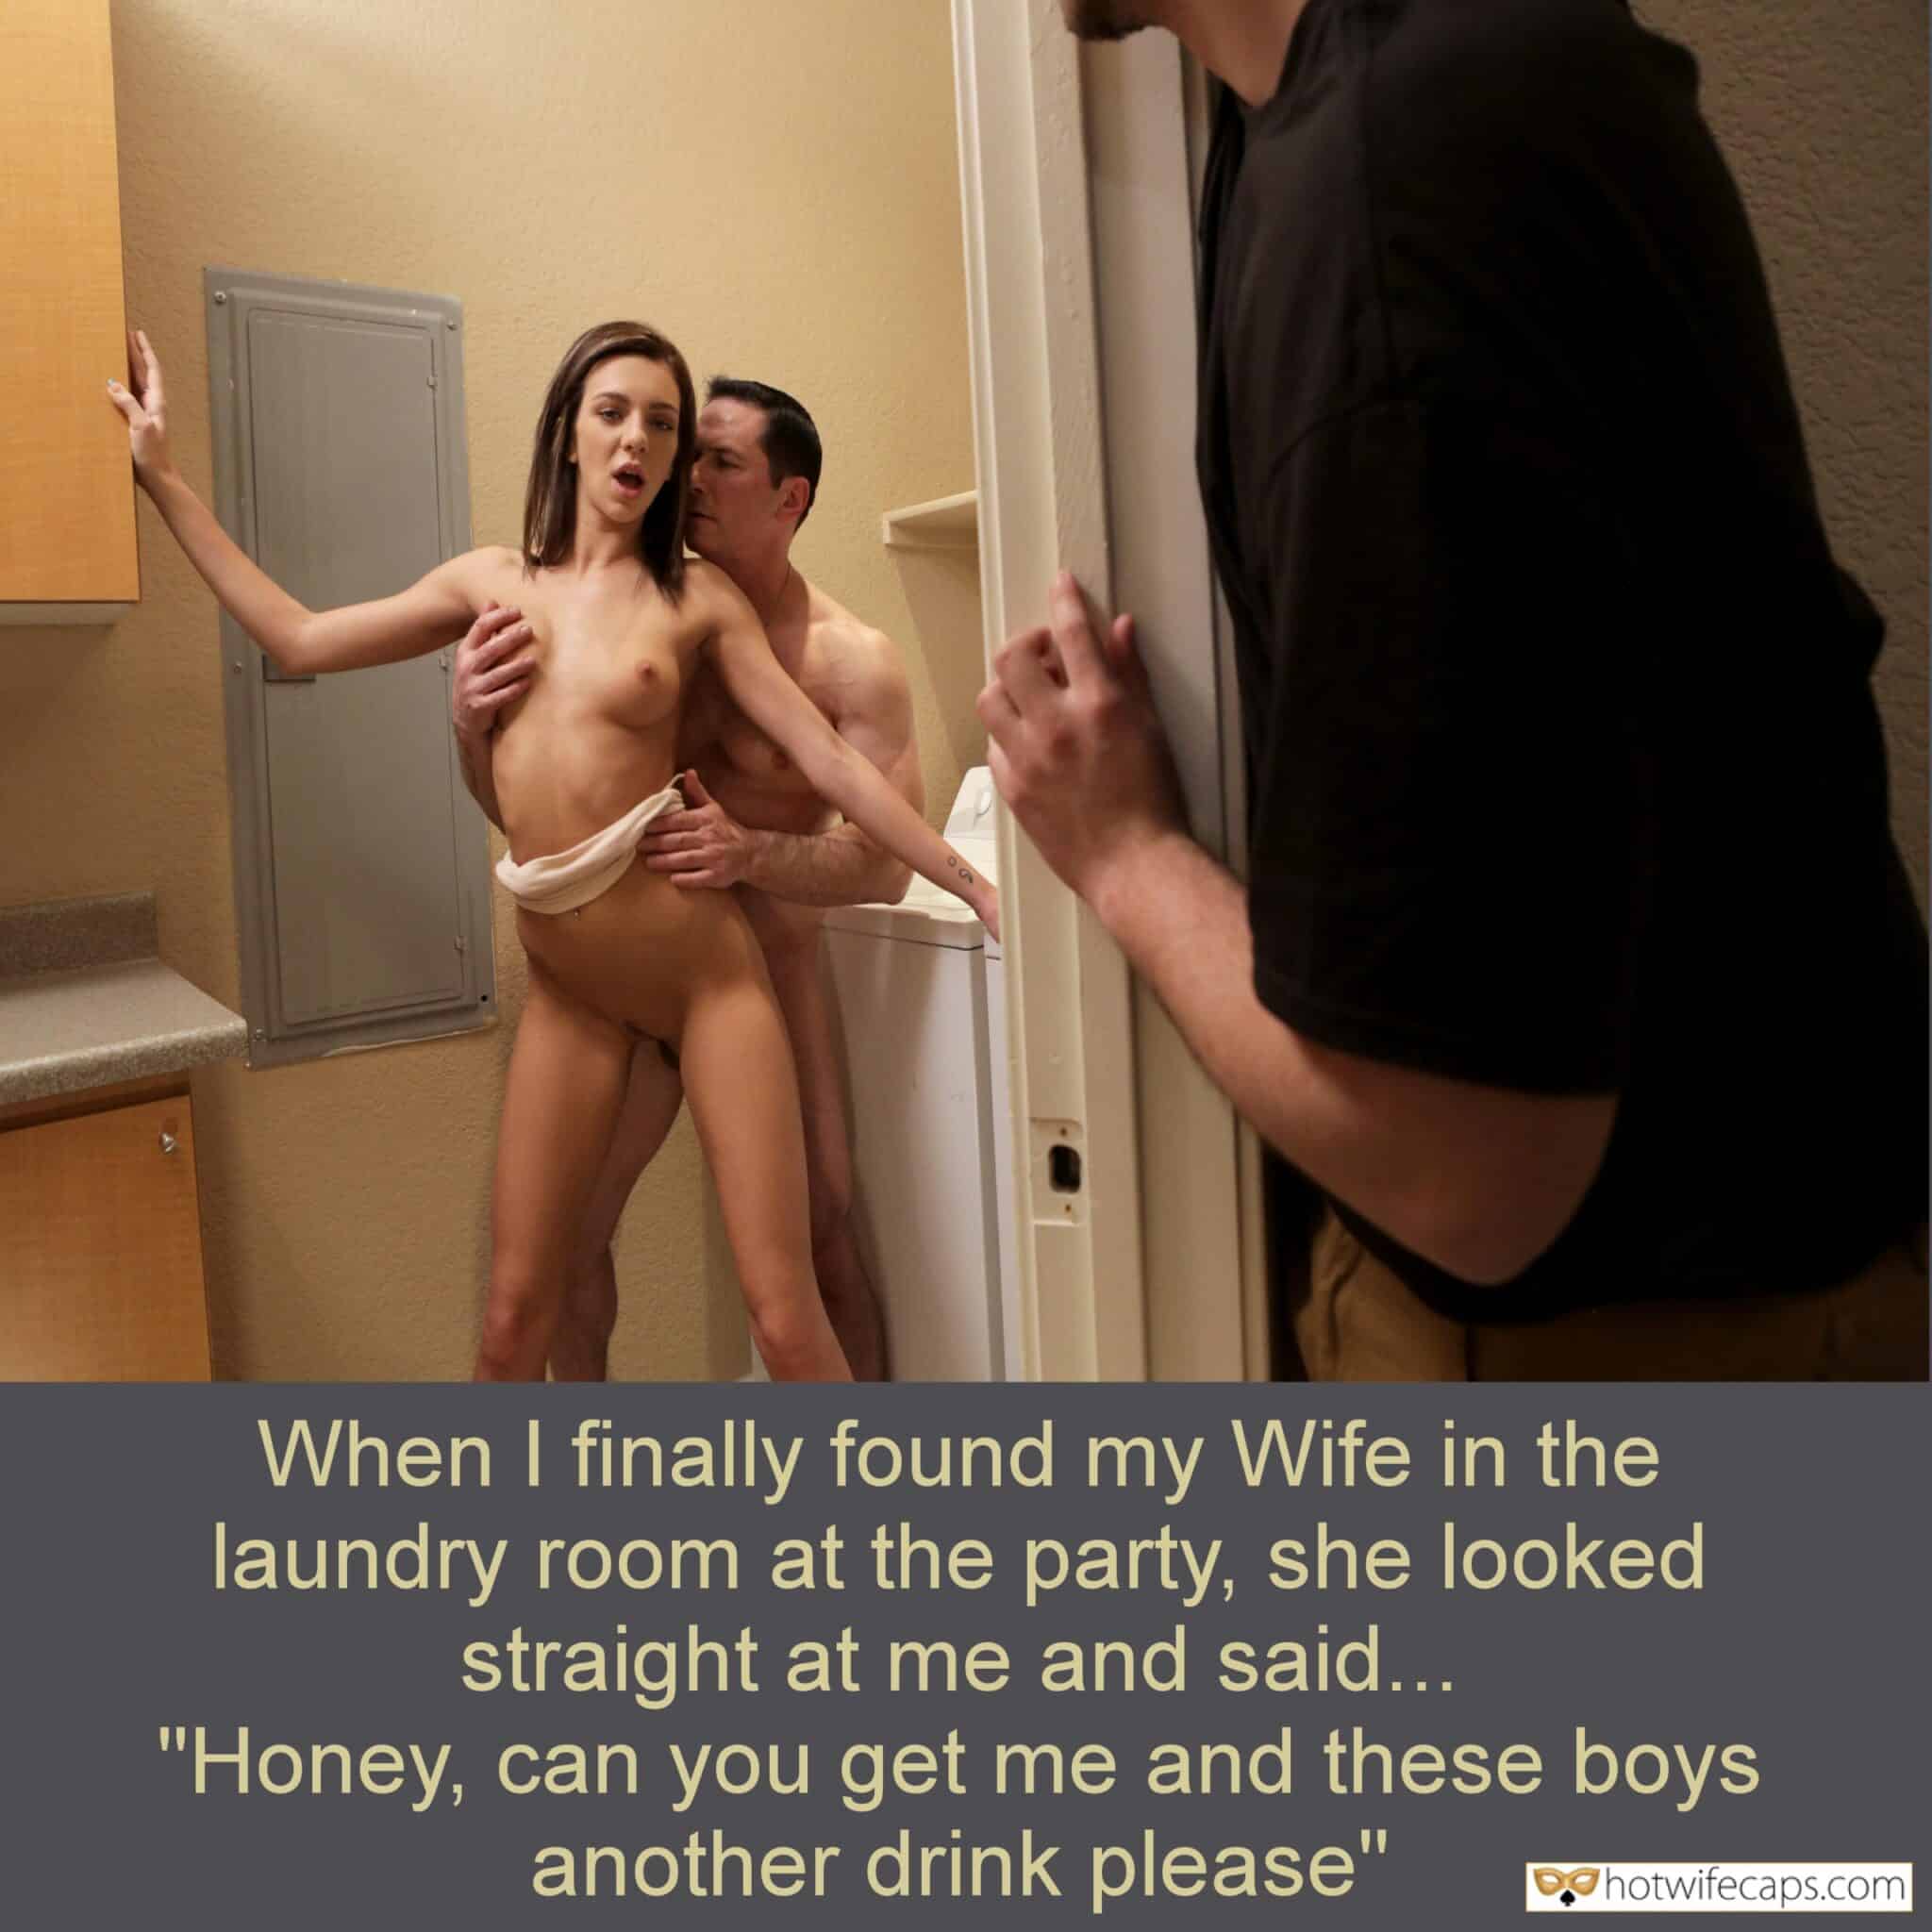 Cheating, Femdom, Humiliation, Public Hotwife Caption №14254 when i caught her fucking bitch refused to stop pic